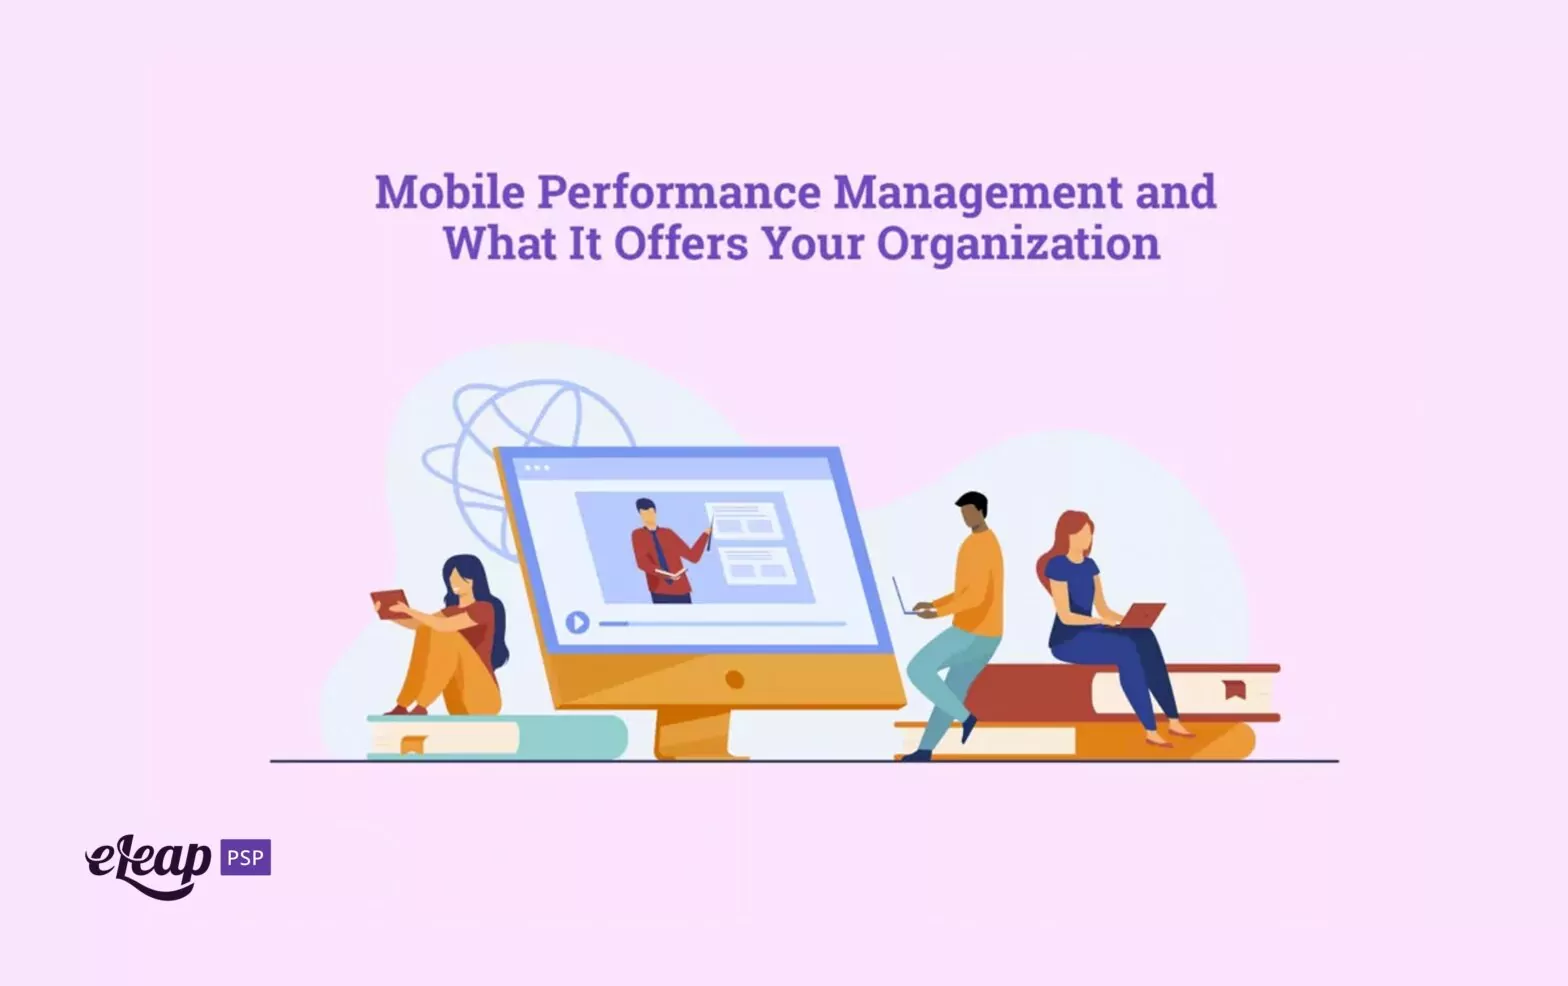 Mobile Performance Management and What It Offers Your Organization